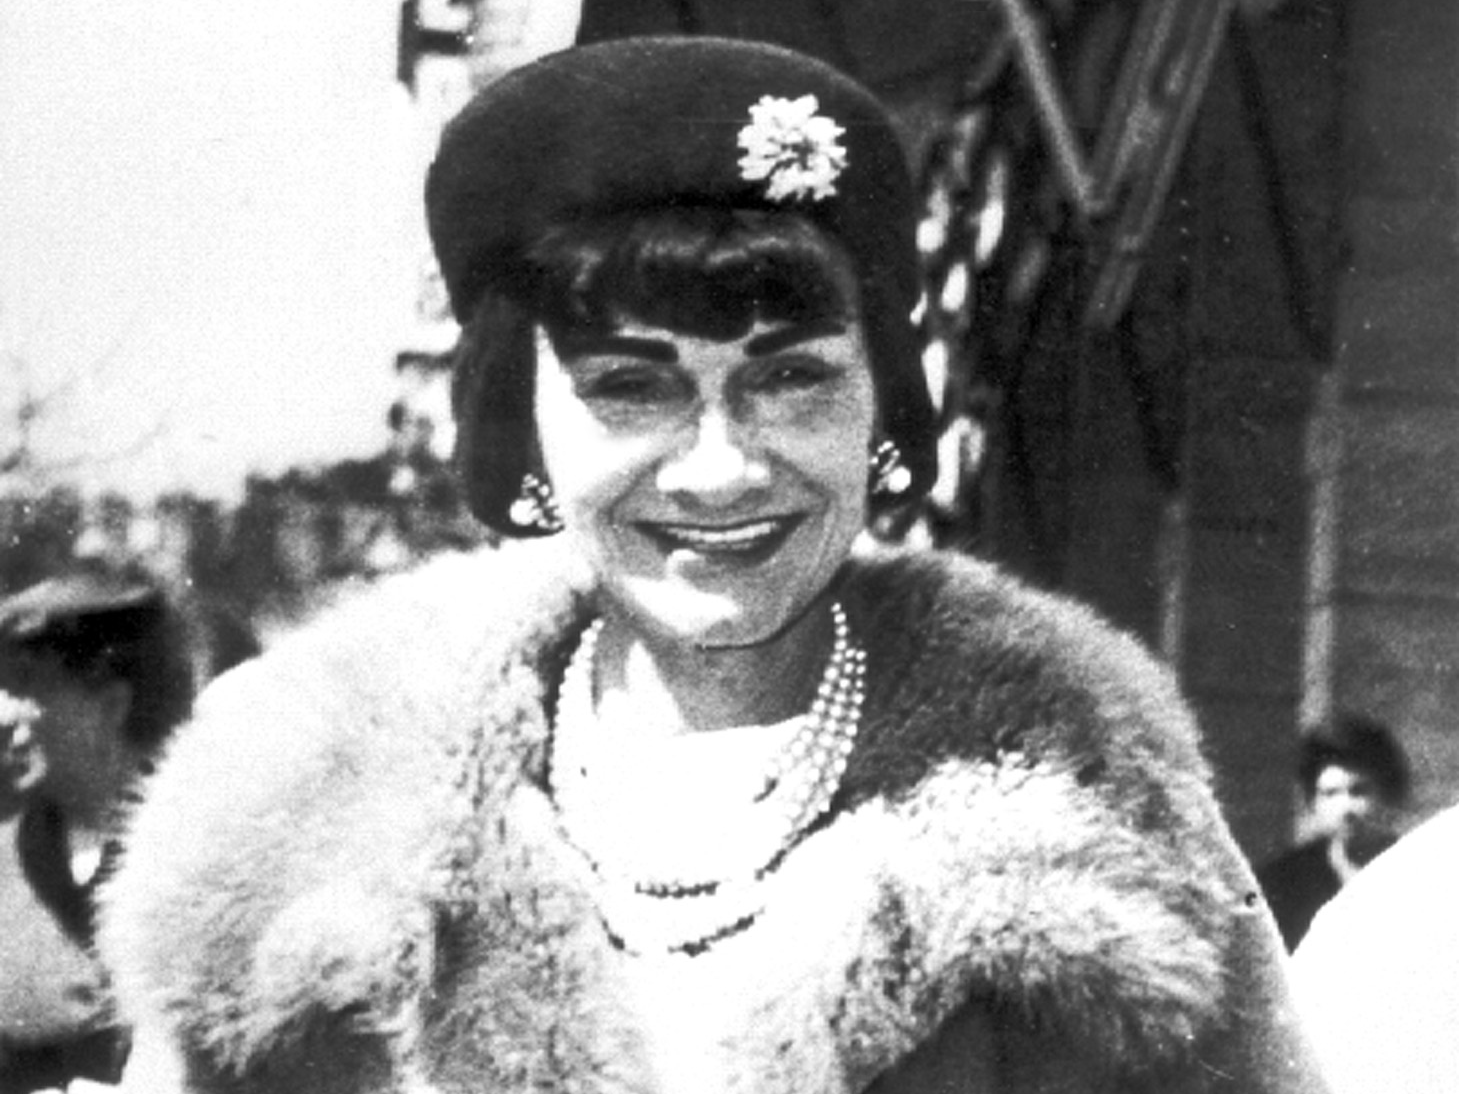 Two biographies on iconic fashion designer Coco Chanel — 